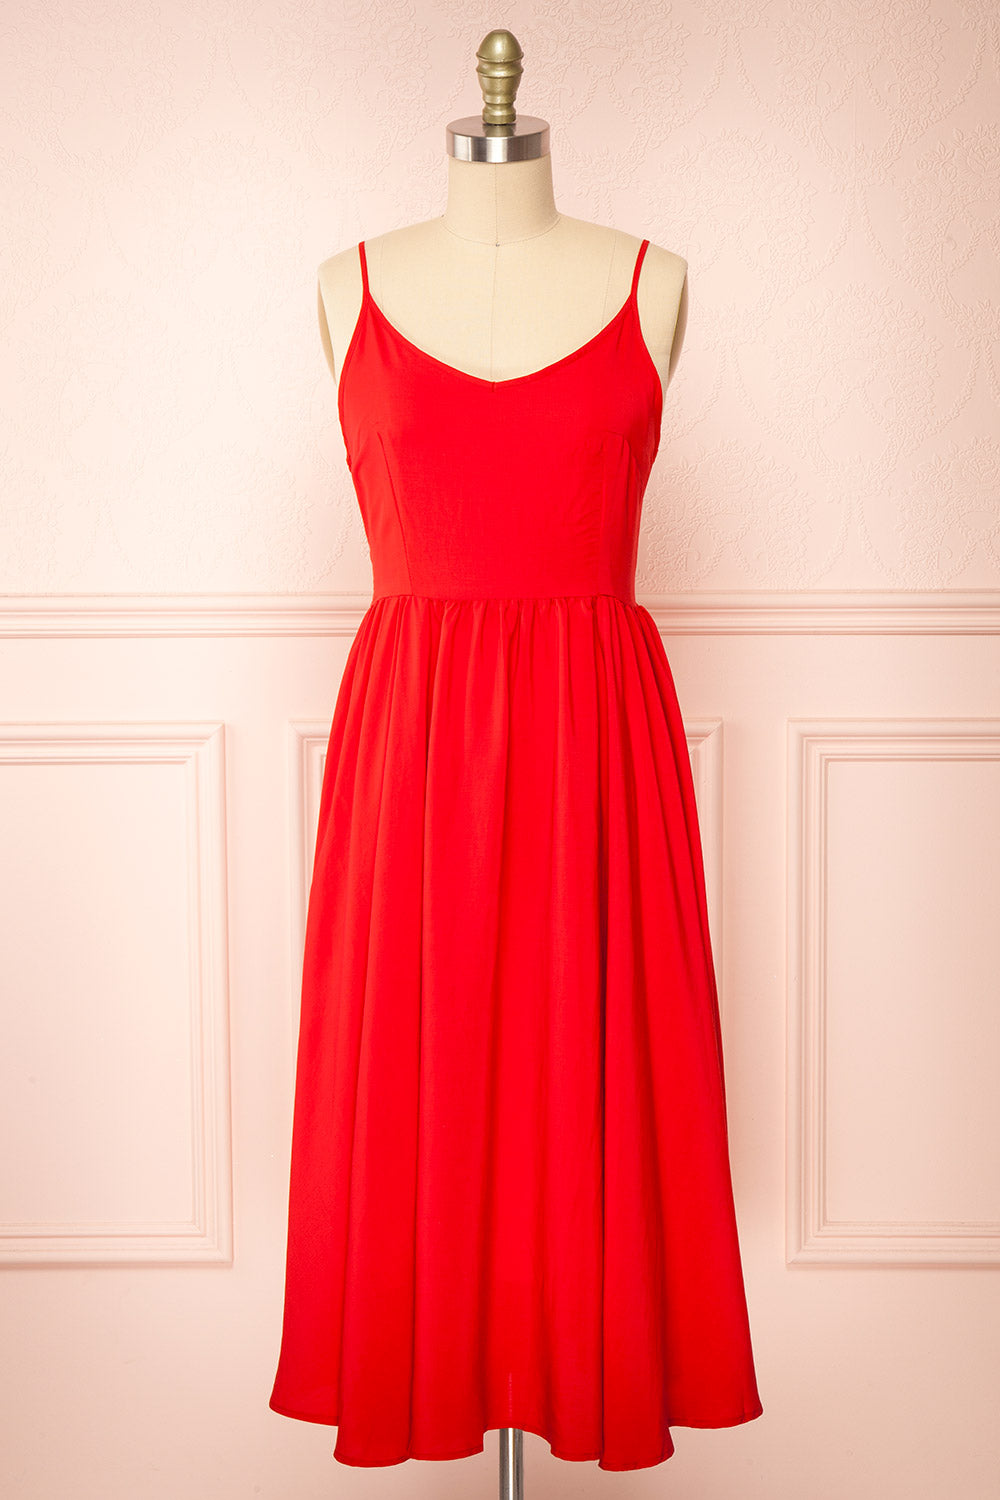 Kloe Red Sleeveless A-line Midi Dress | Boutique 1861 front view